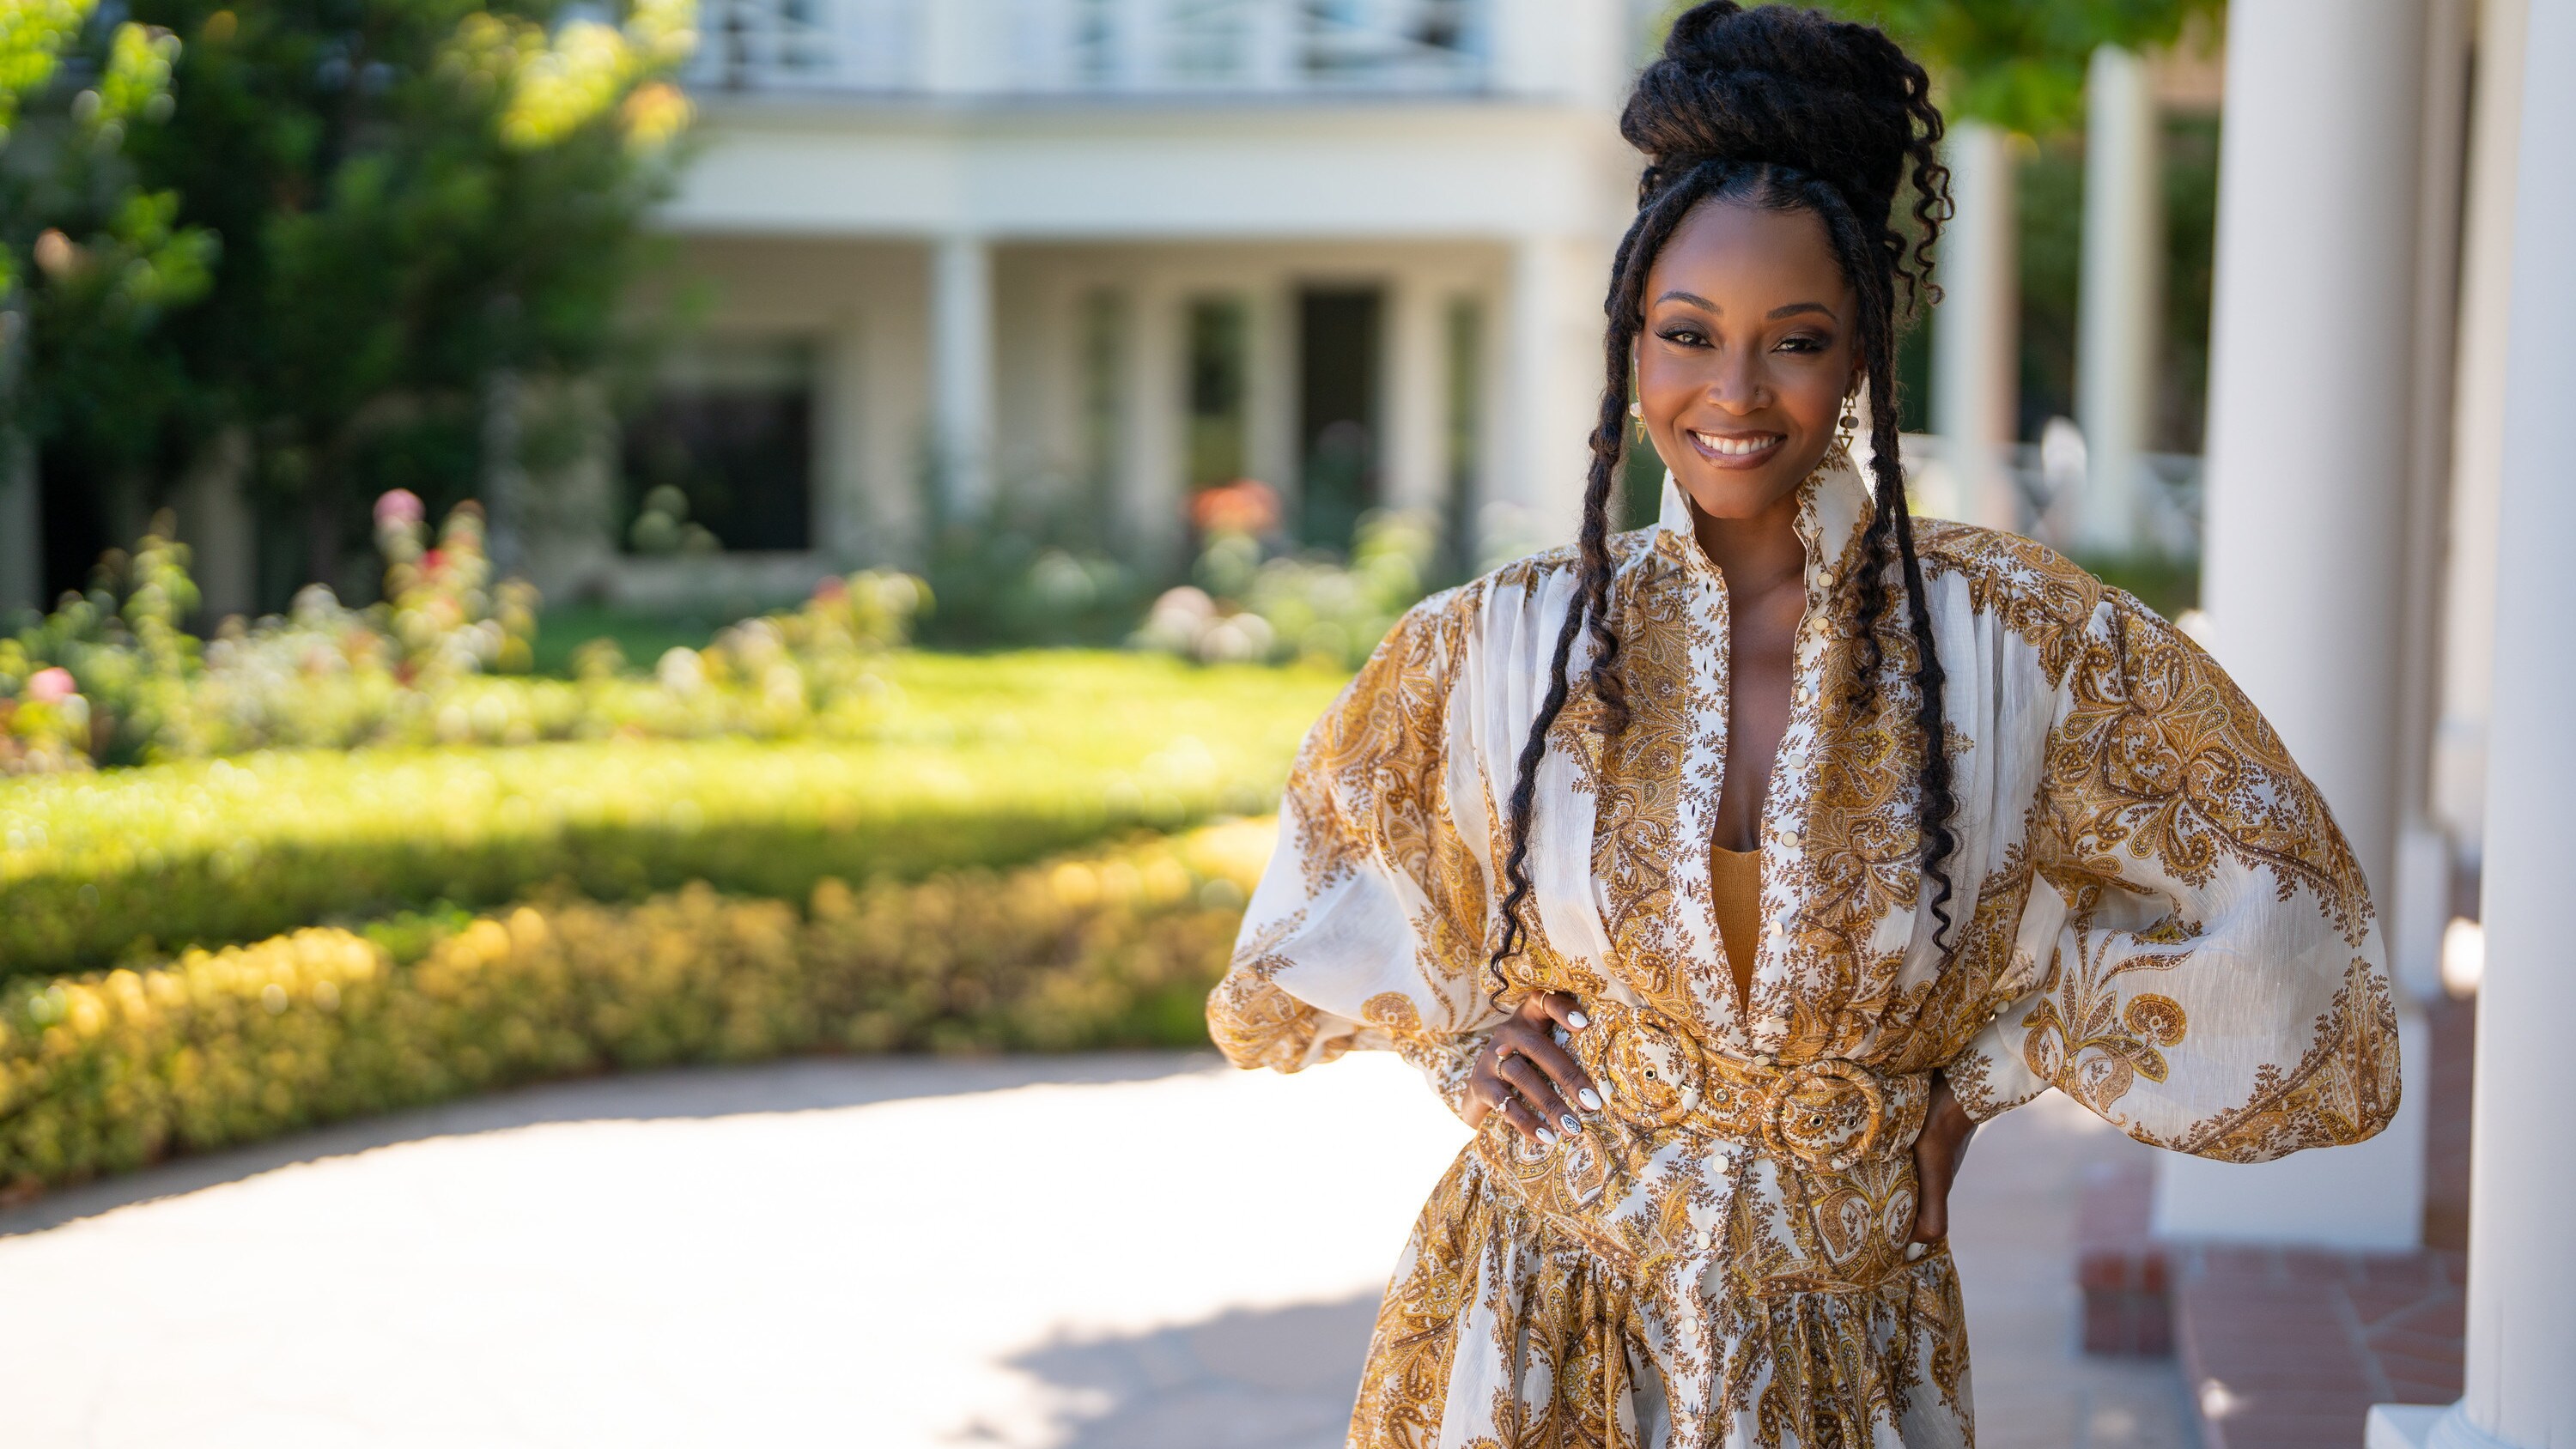 YaYa DaCosta on Turning the Tables with Robin Roberts. In season 2 of Turning the Tables with Robin Roberts, Robin Roberts gets personal with a new group of Hollywood's iconic women as they bear witness to their incredible journeys on their path to purpose. (Disney/Ser Baffo)